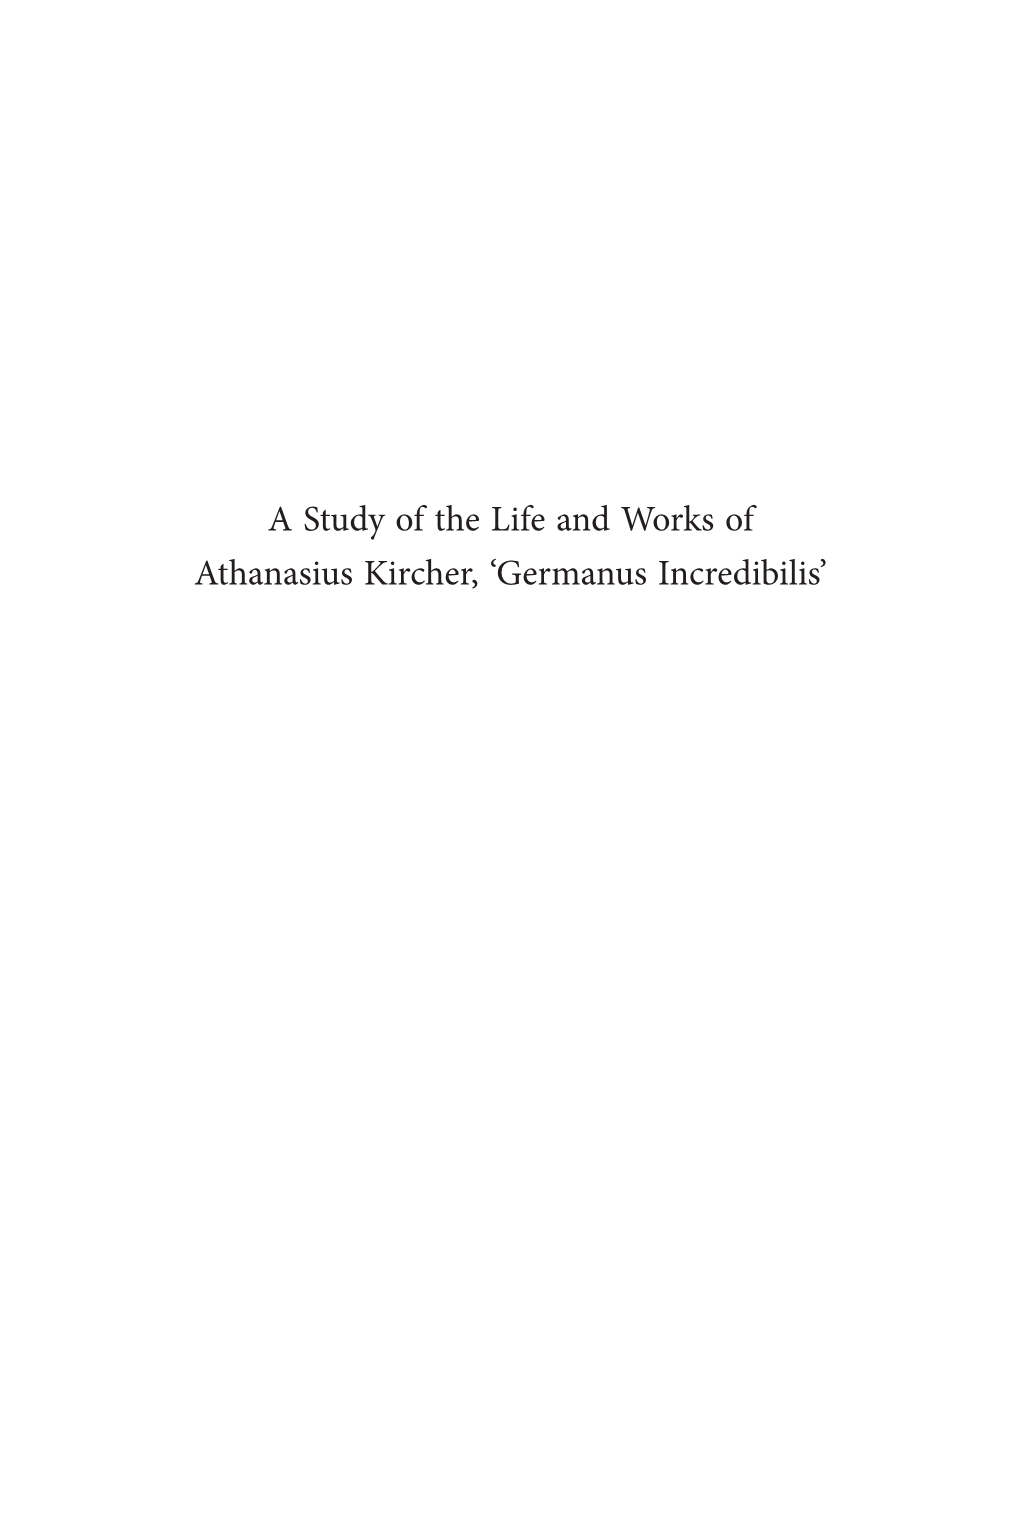 A Study of the Life and Works of Athanasius Kircher, 'Germanus